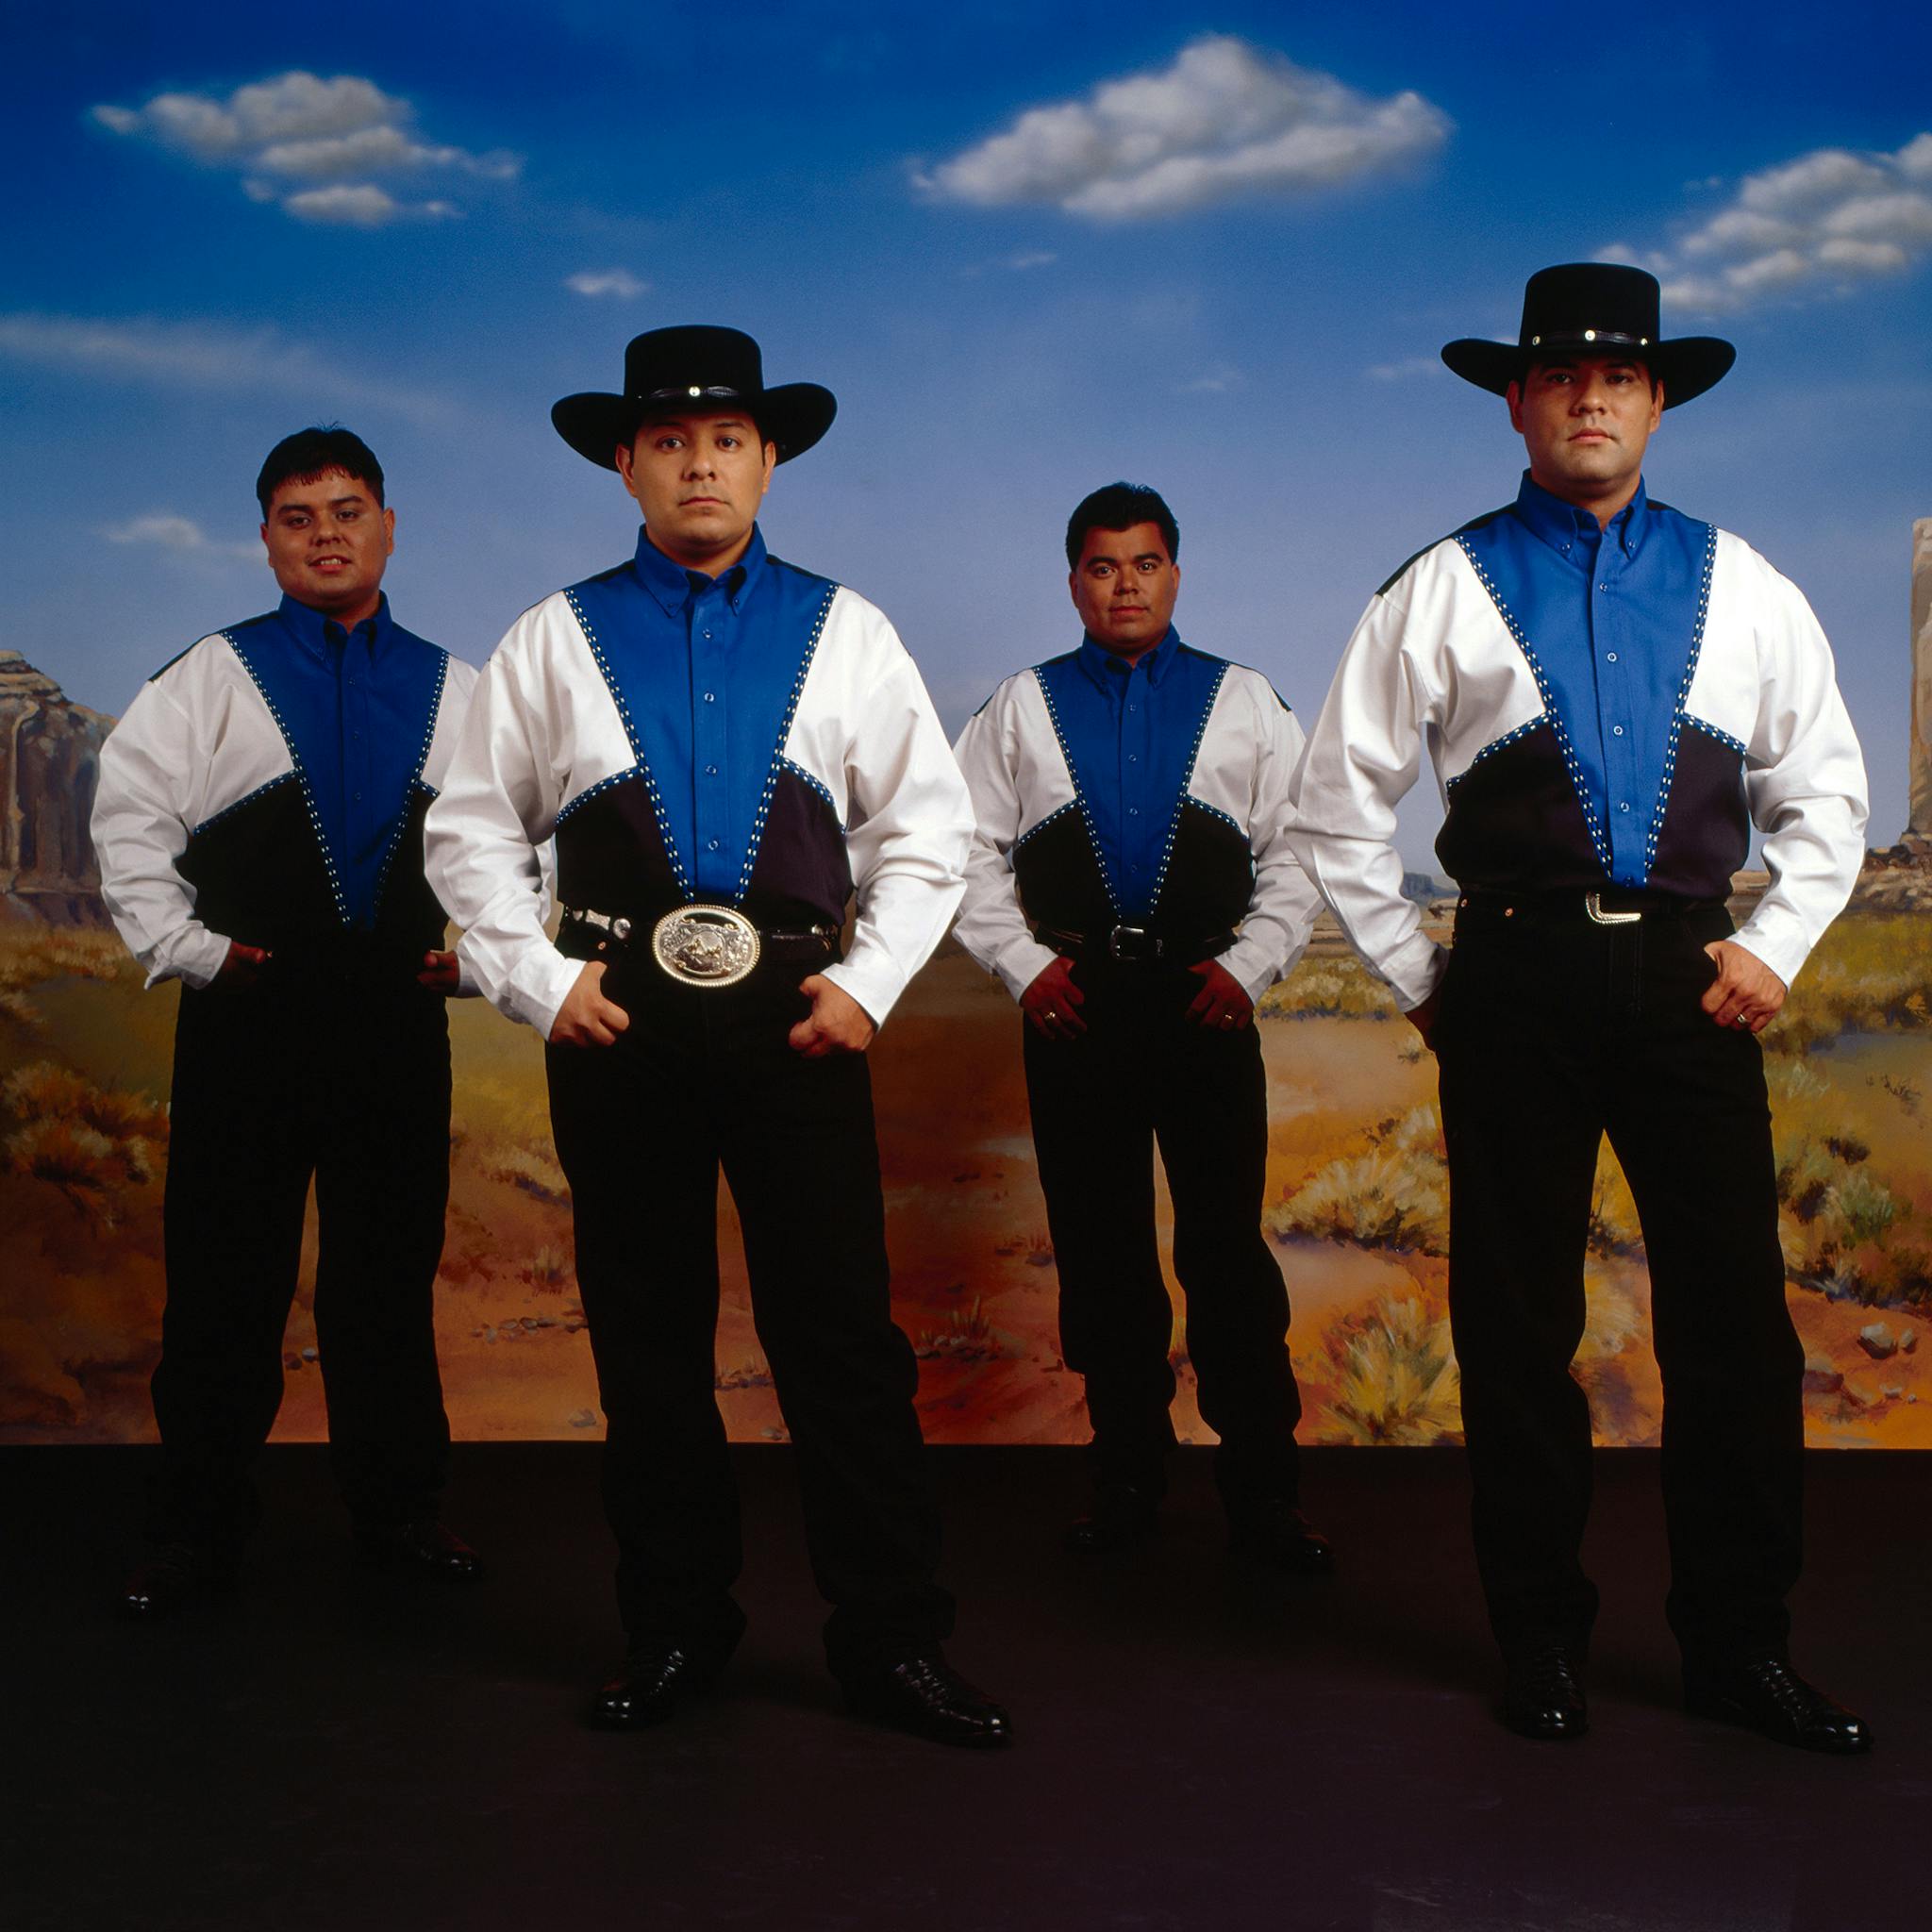 Brothers Johnny, James Jorge and Jesse Arreola of Los Palominos, 2007